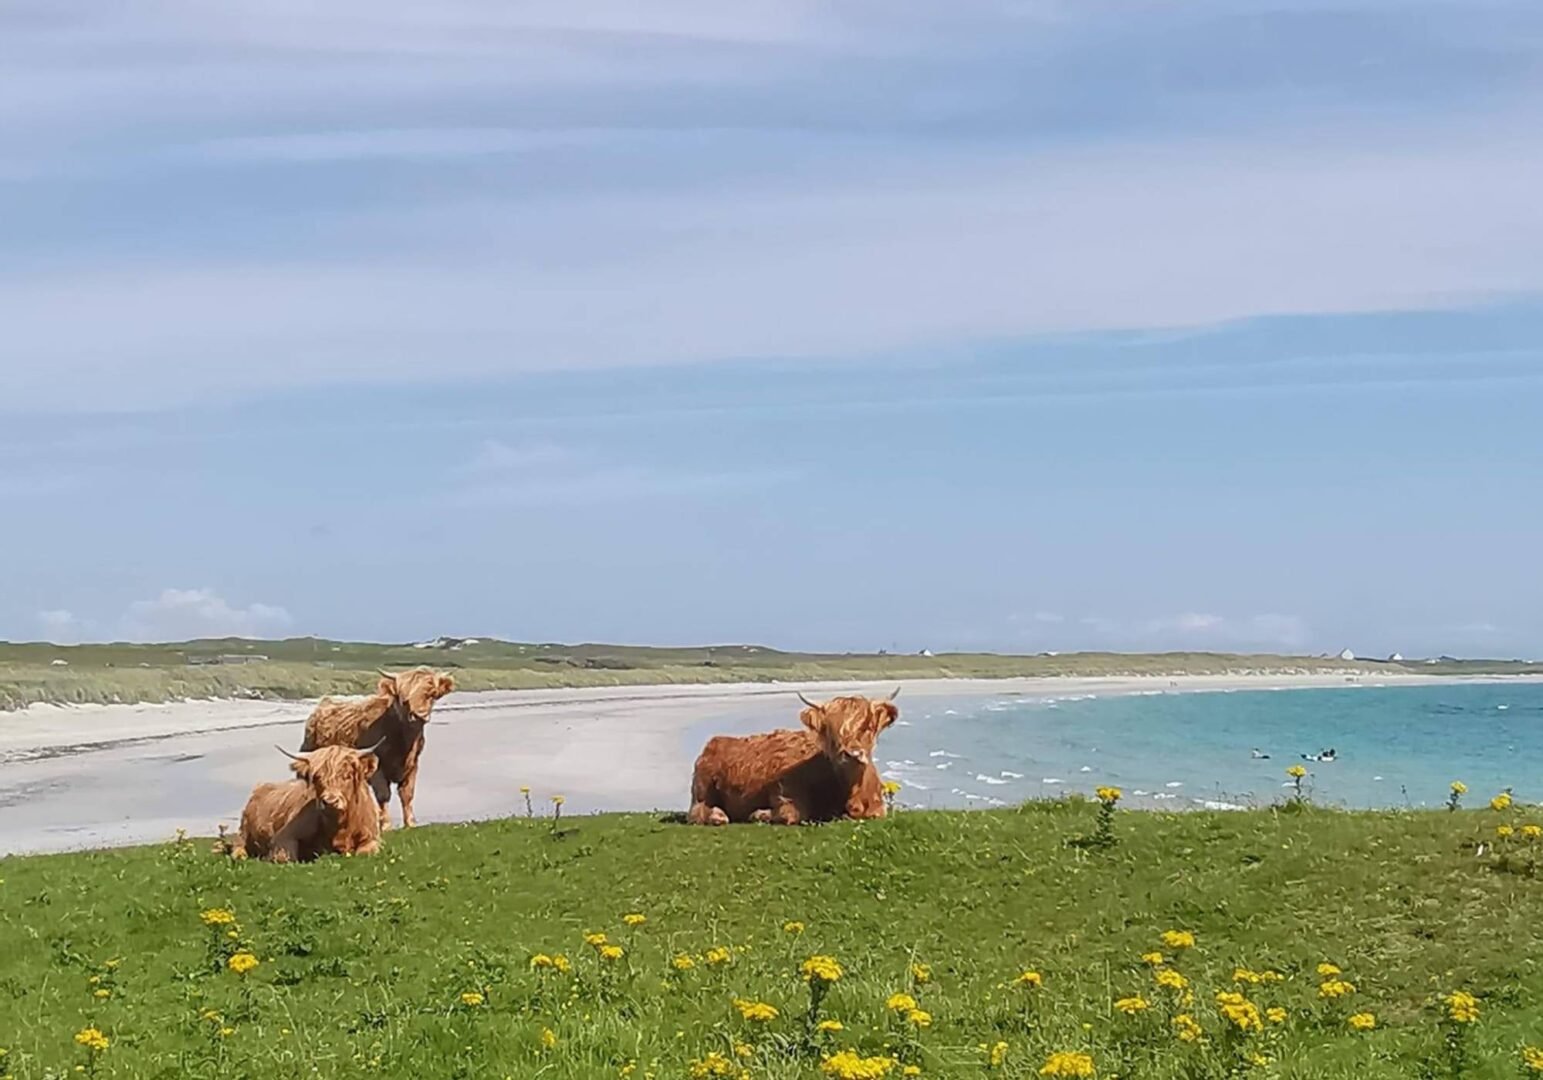 Highland cows in front of a beach